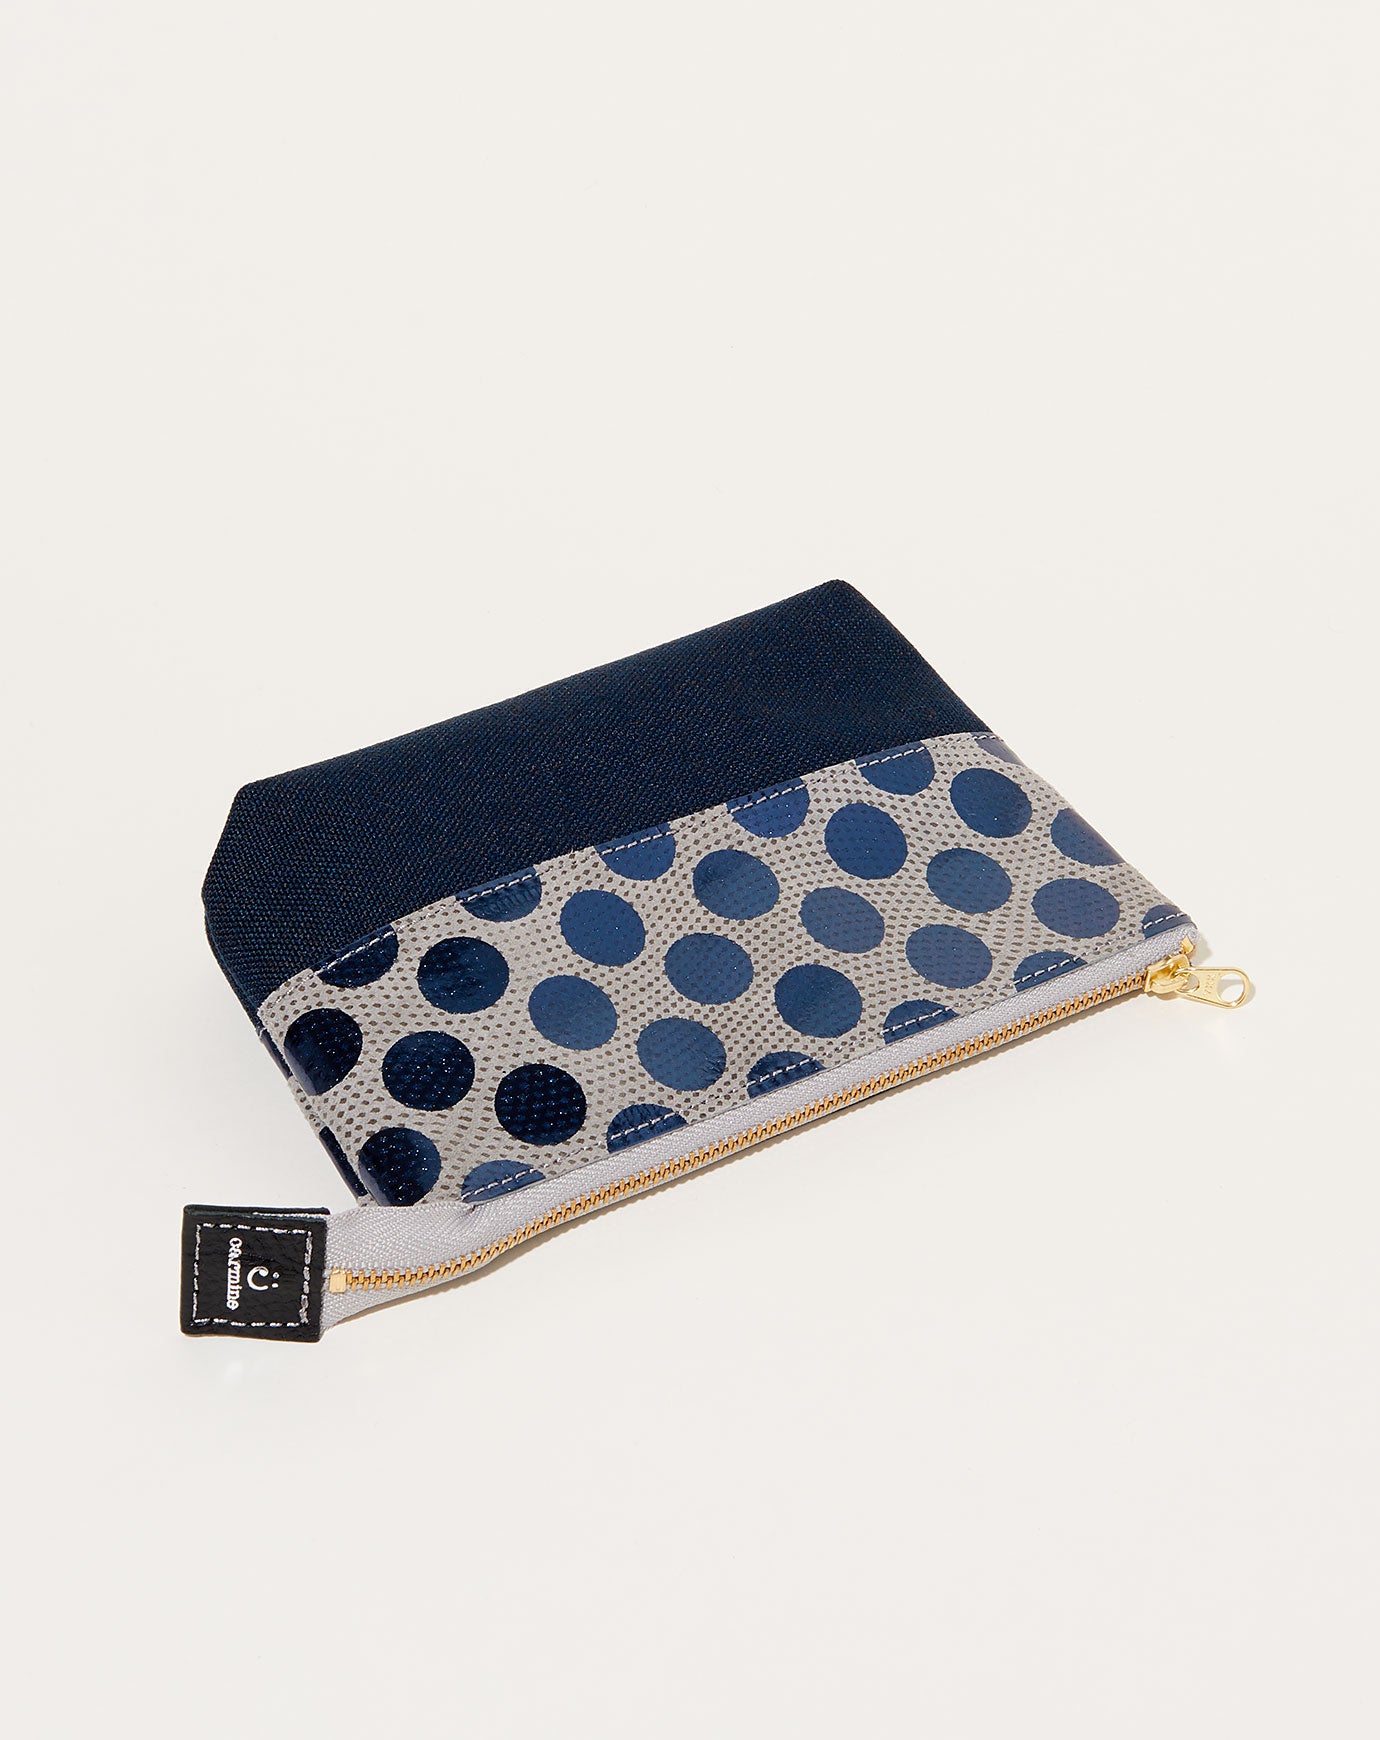 Carmine Ecology Leather Pouch in Grey